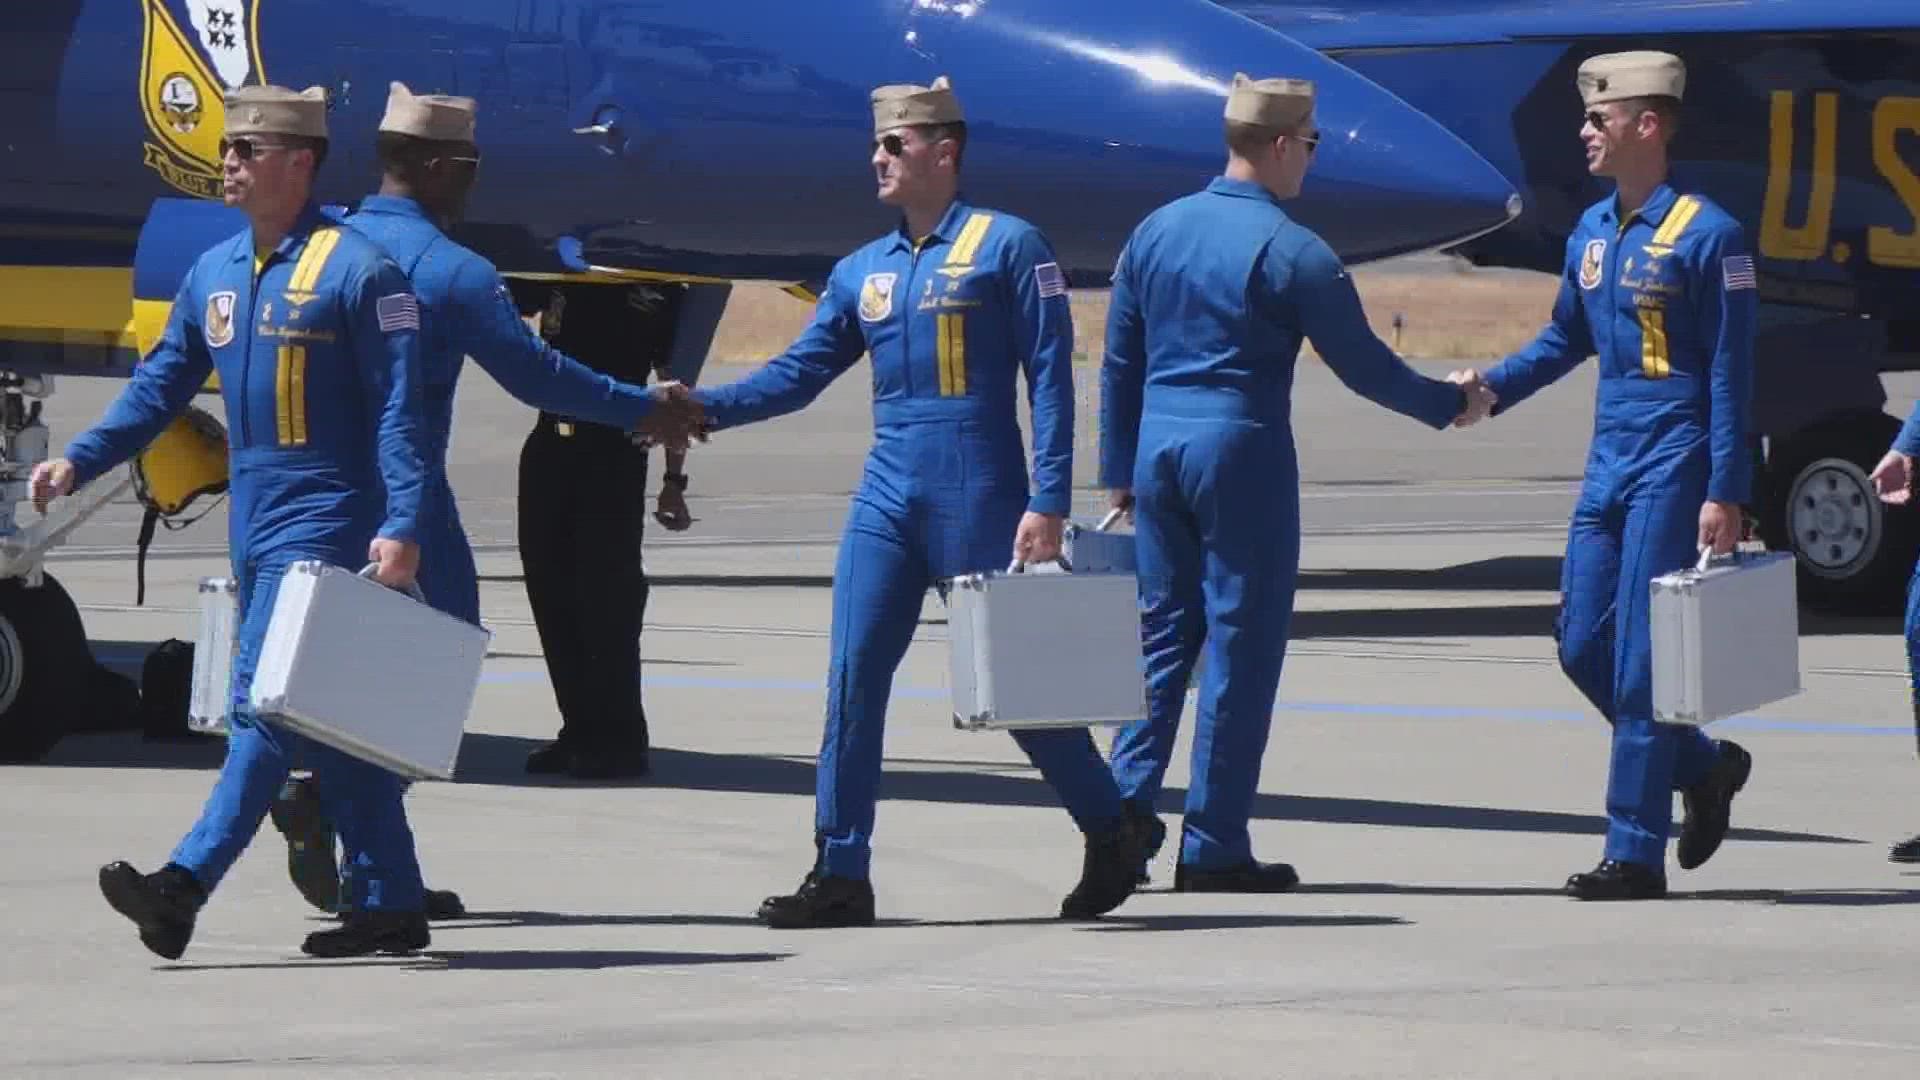 Meet some of the team who brings the Blue Angel's show to Seattle's